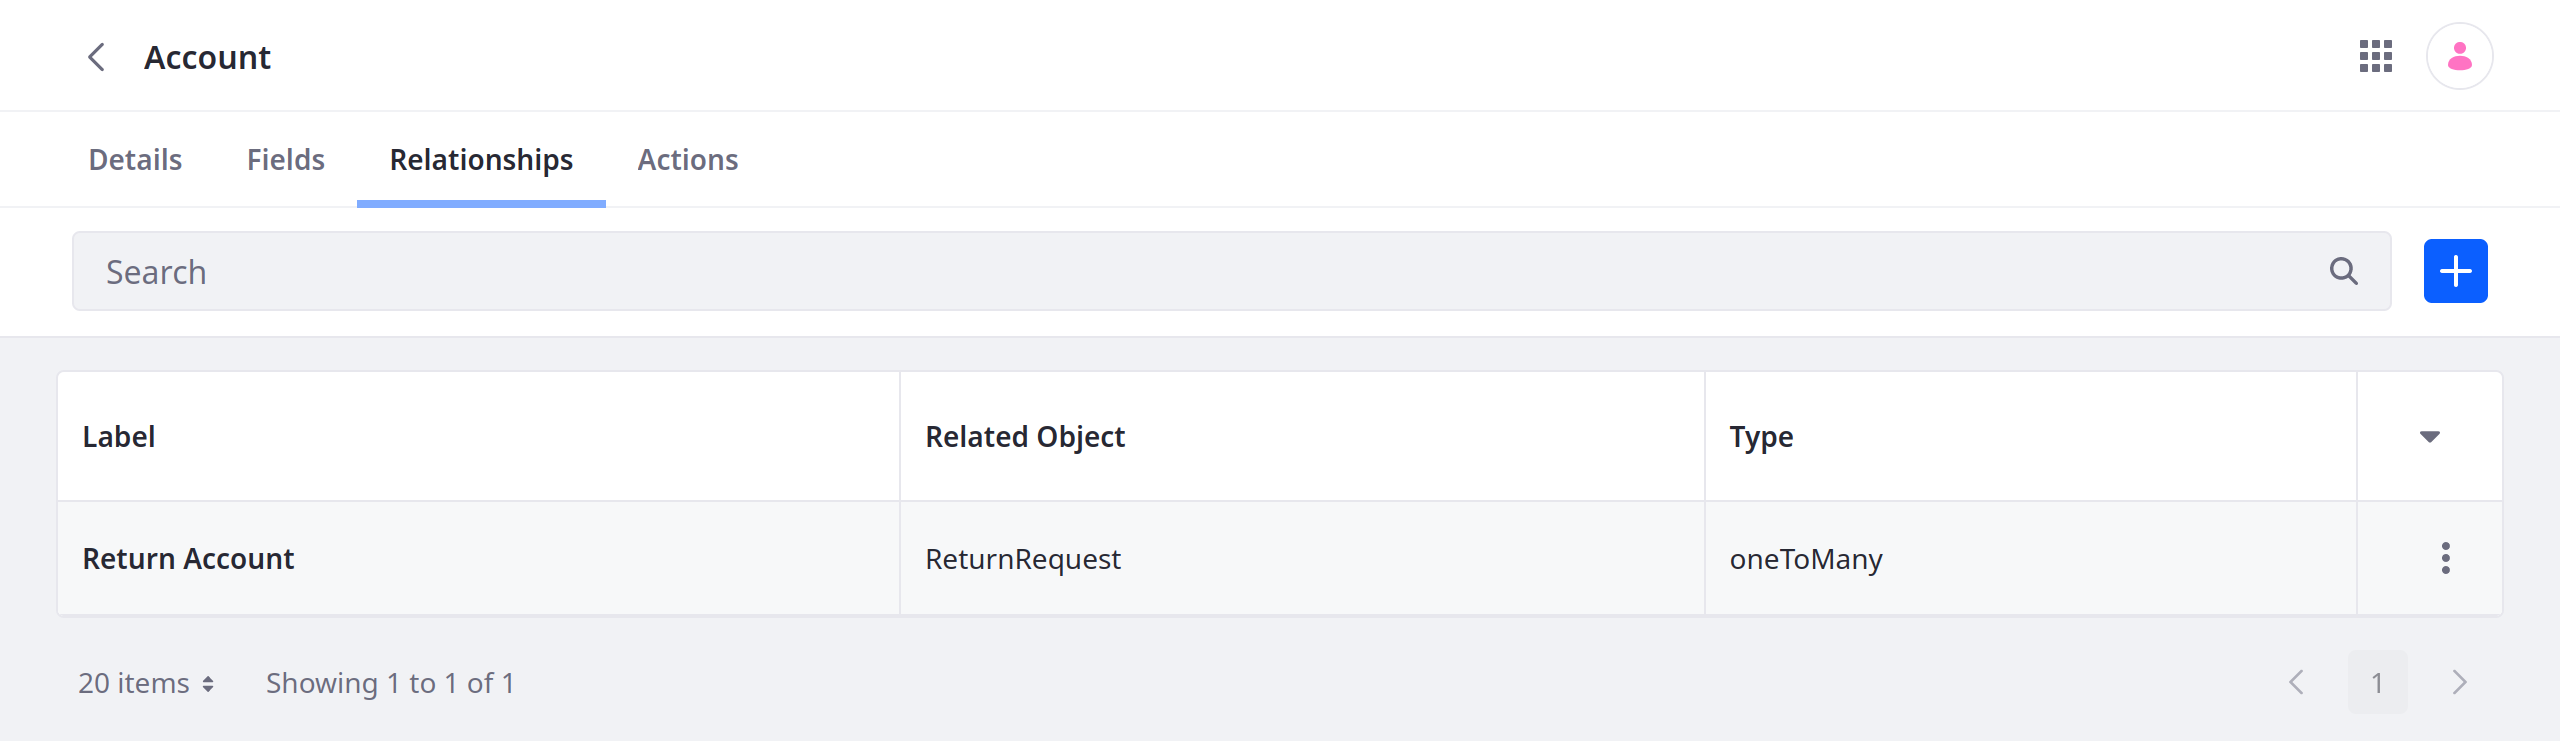 Relate the Account system object to the desired custom object.